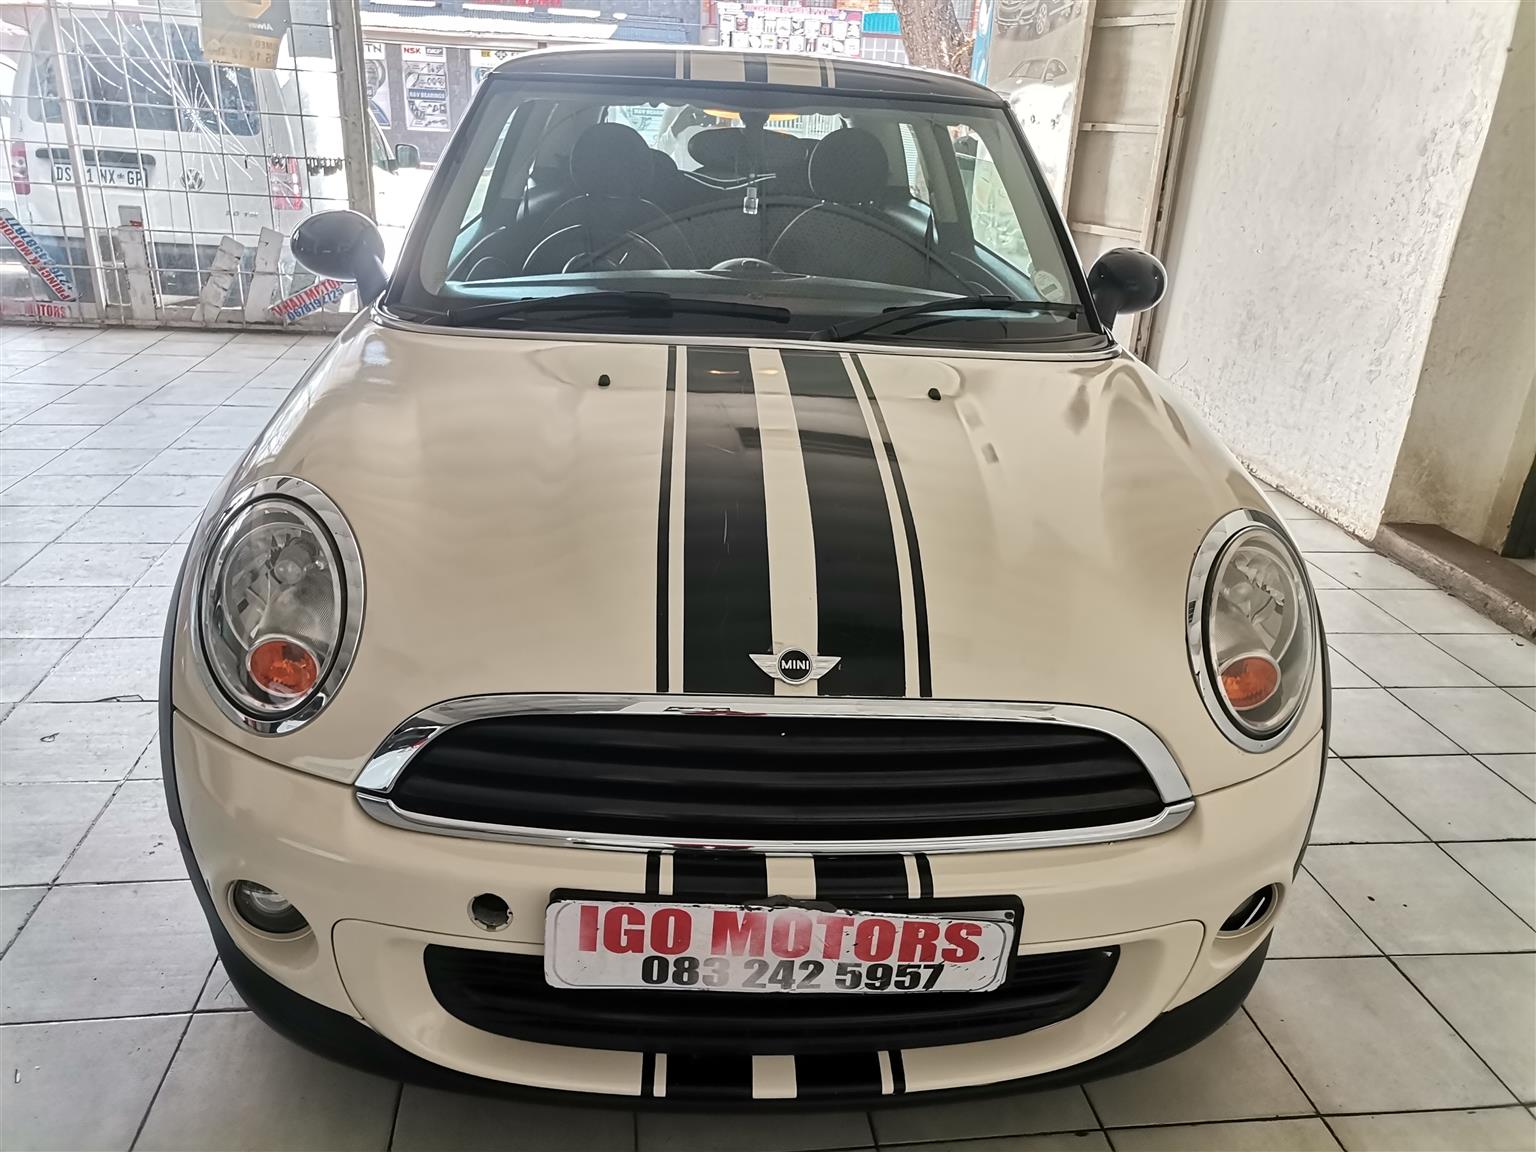 2014 MINI COOPER HATCHBACK 1.6 MANUAL Mechanically perfect wit S Book